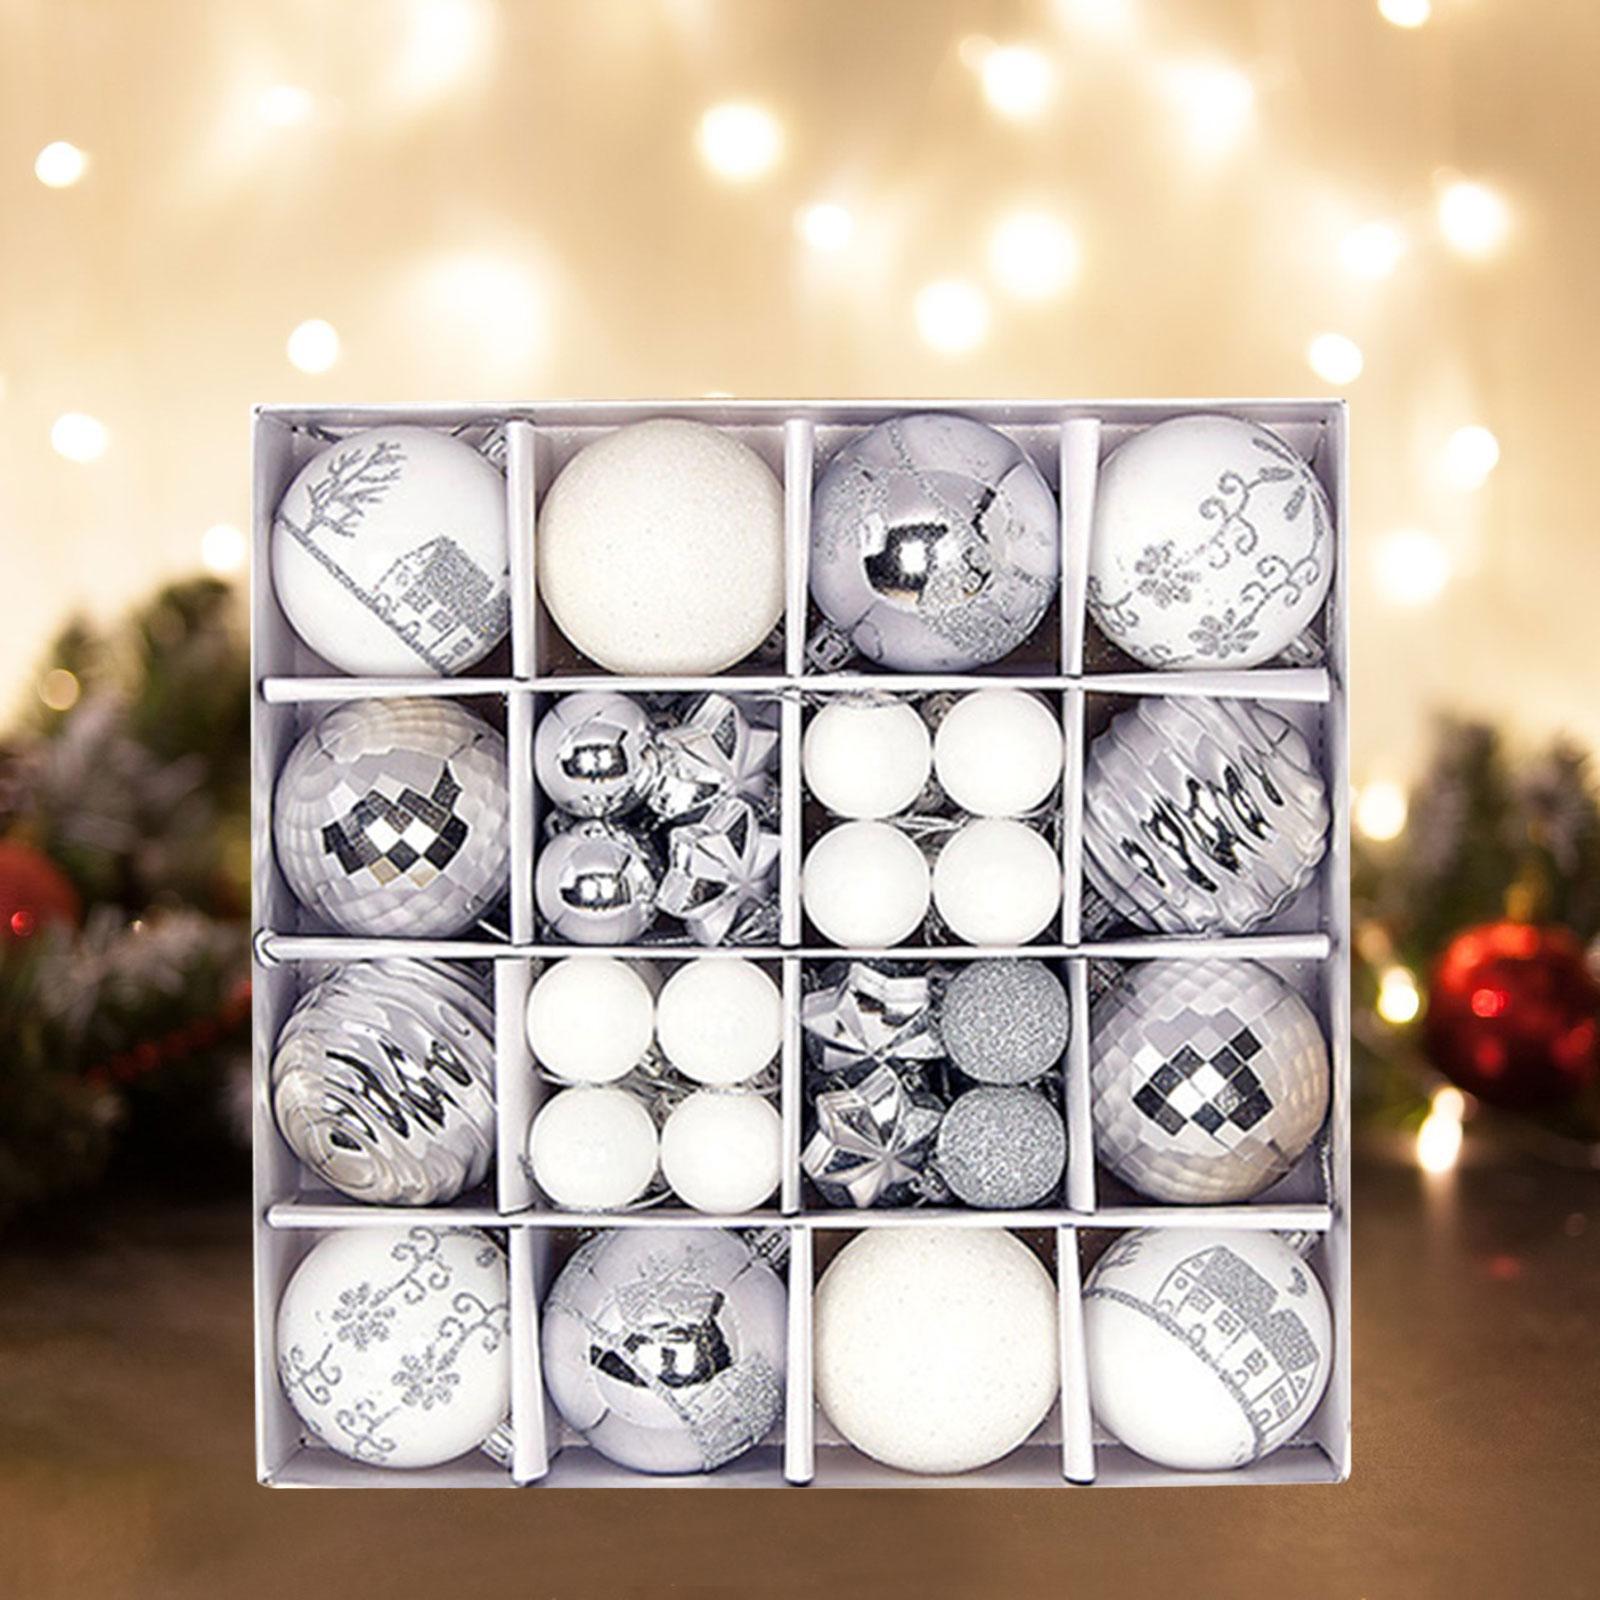 44 Pieces Christmas Ball Ornaments Set Pendant Drops Lightweight Christmas Tree Hanging Ornaments for Halloween Cafe Holidays - Silver White